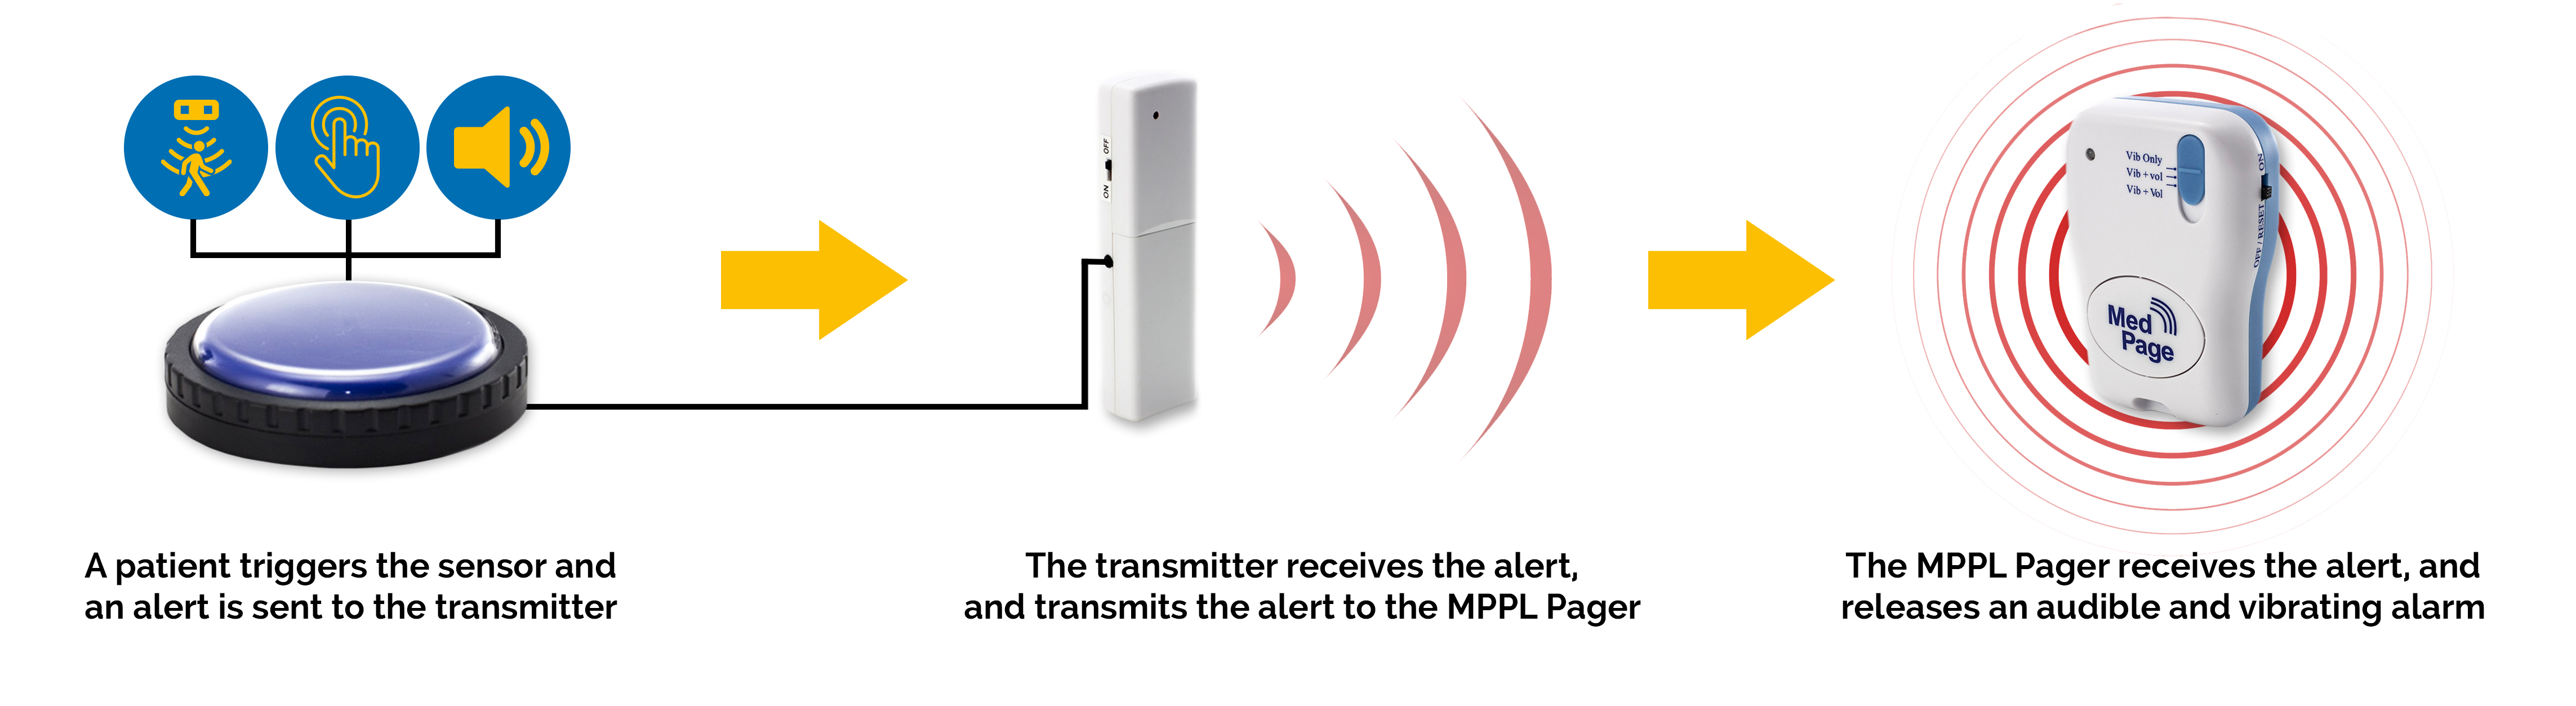 How the MPPL Alarm System Works